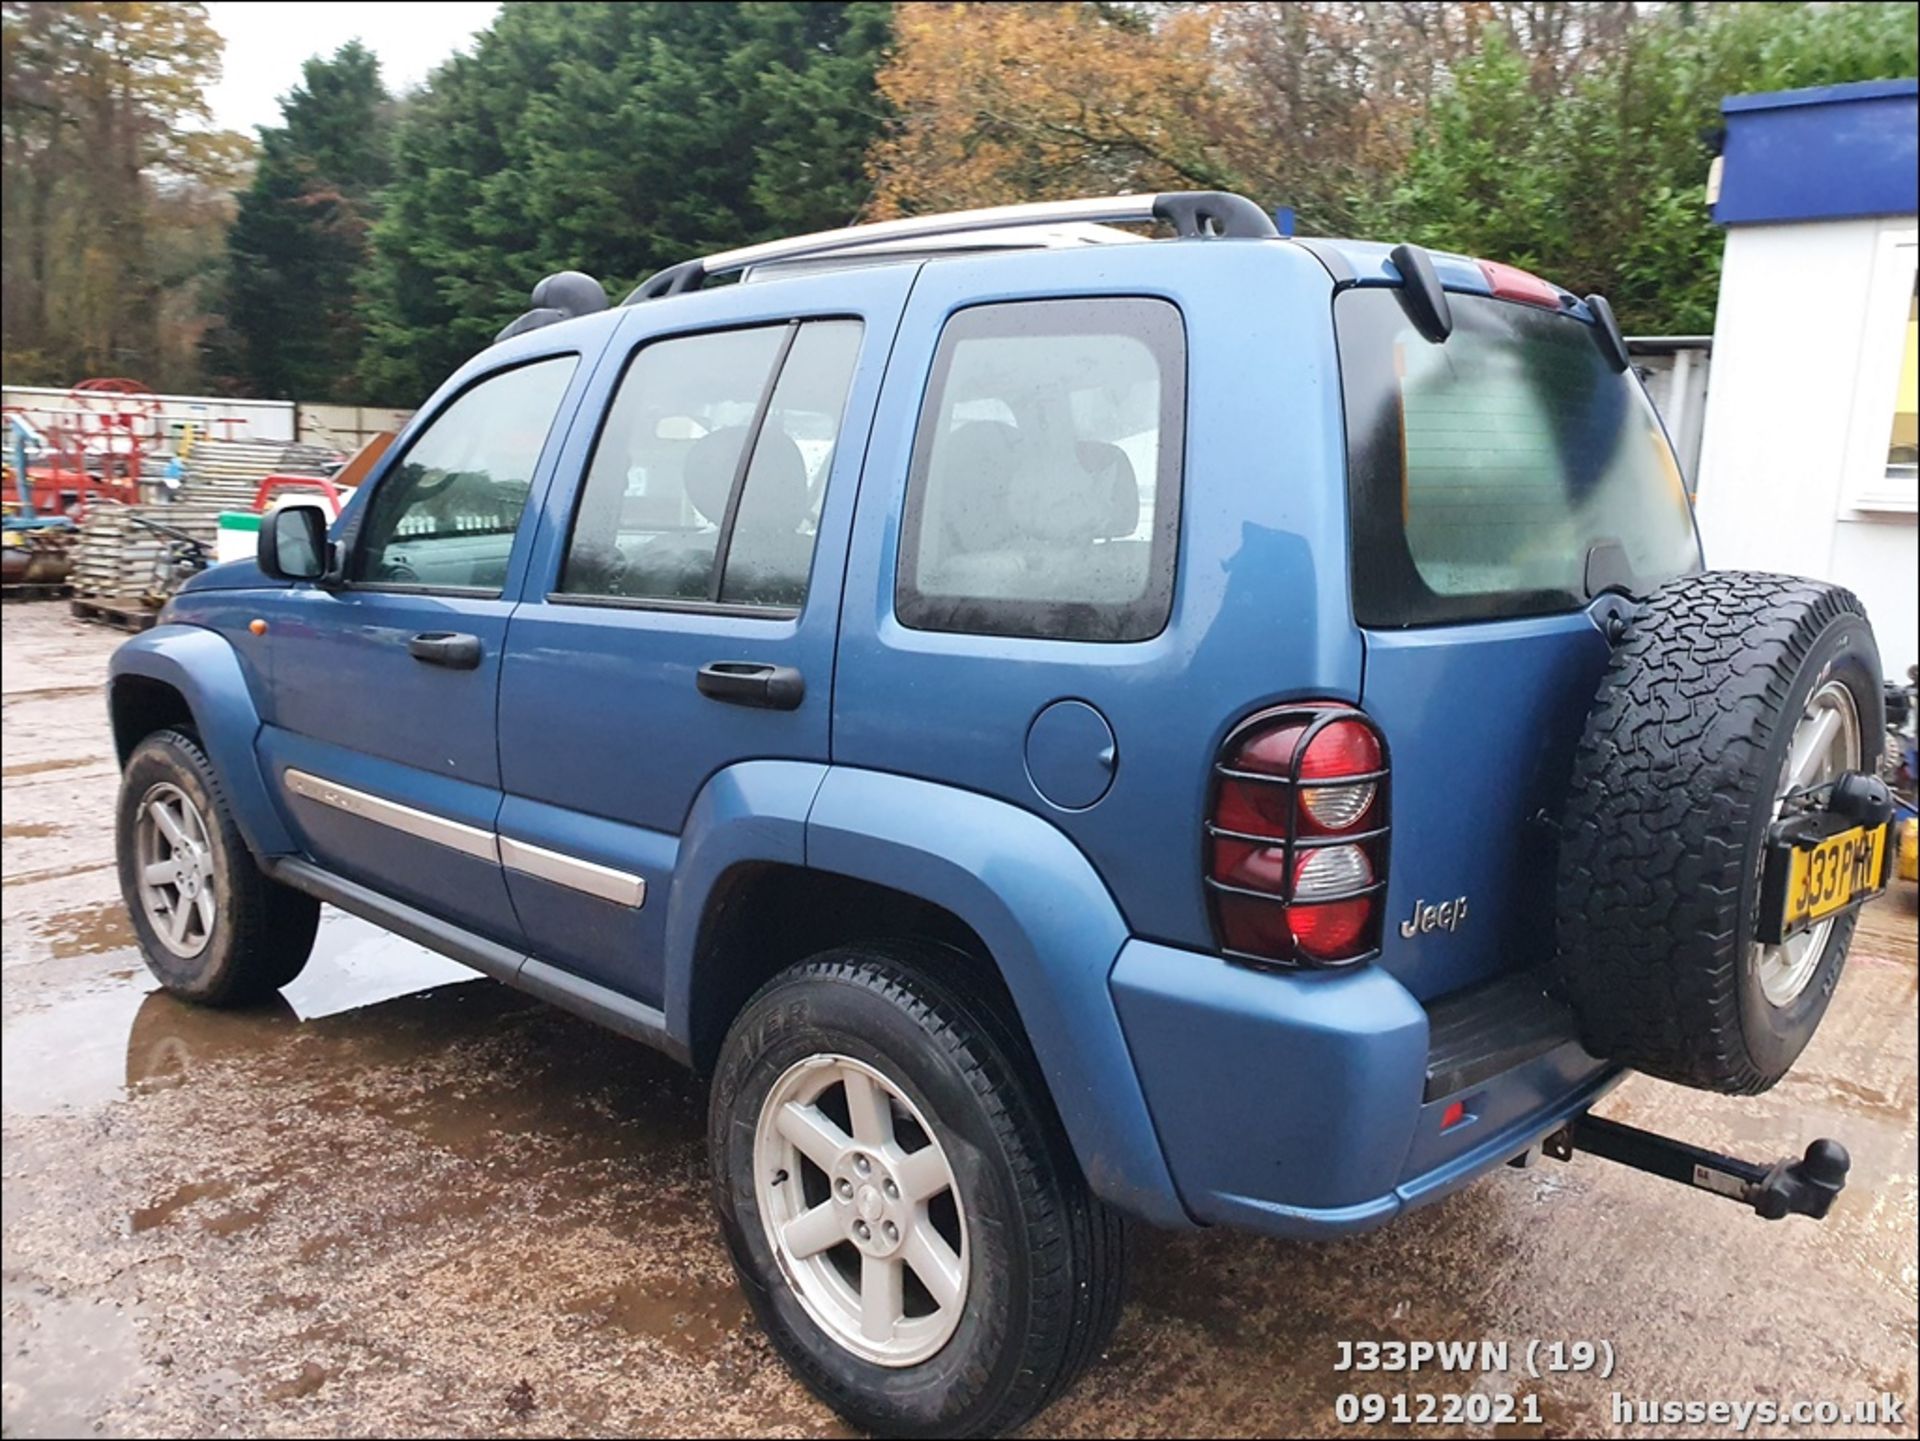 2005 JEEP CHEROKEE LIMITED CRD A - 2766cc 5dr Estate (Blue, 174k) - Image 19 of 28